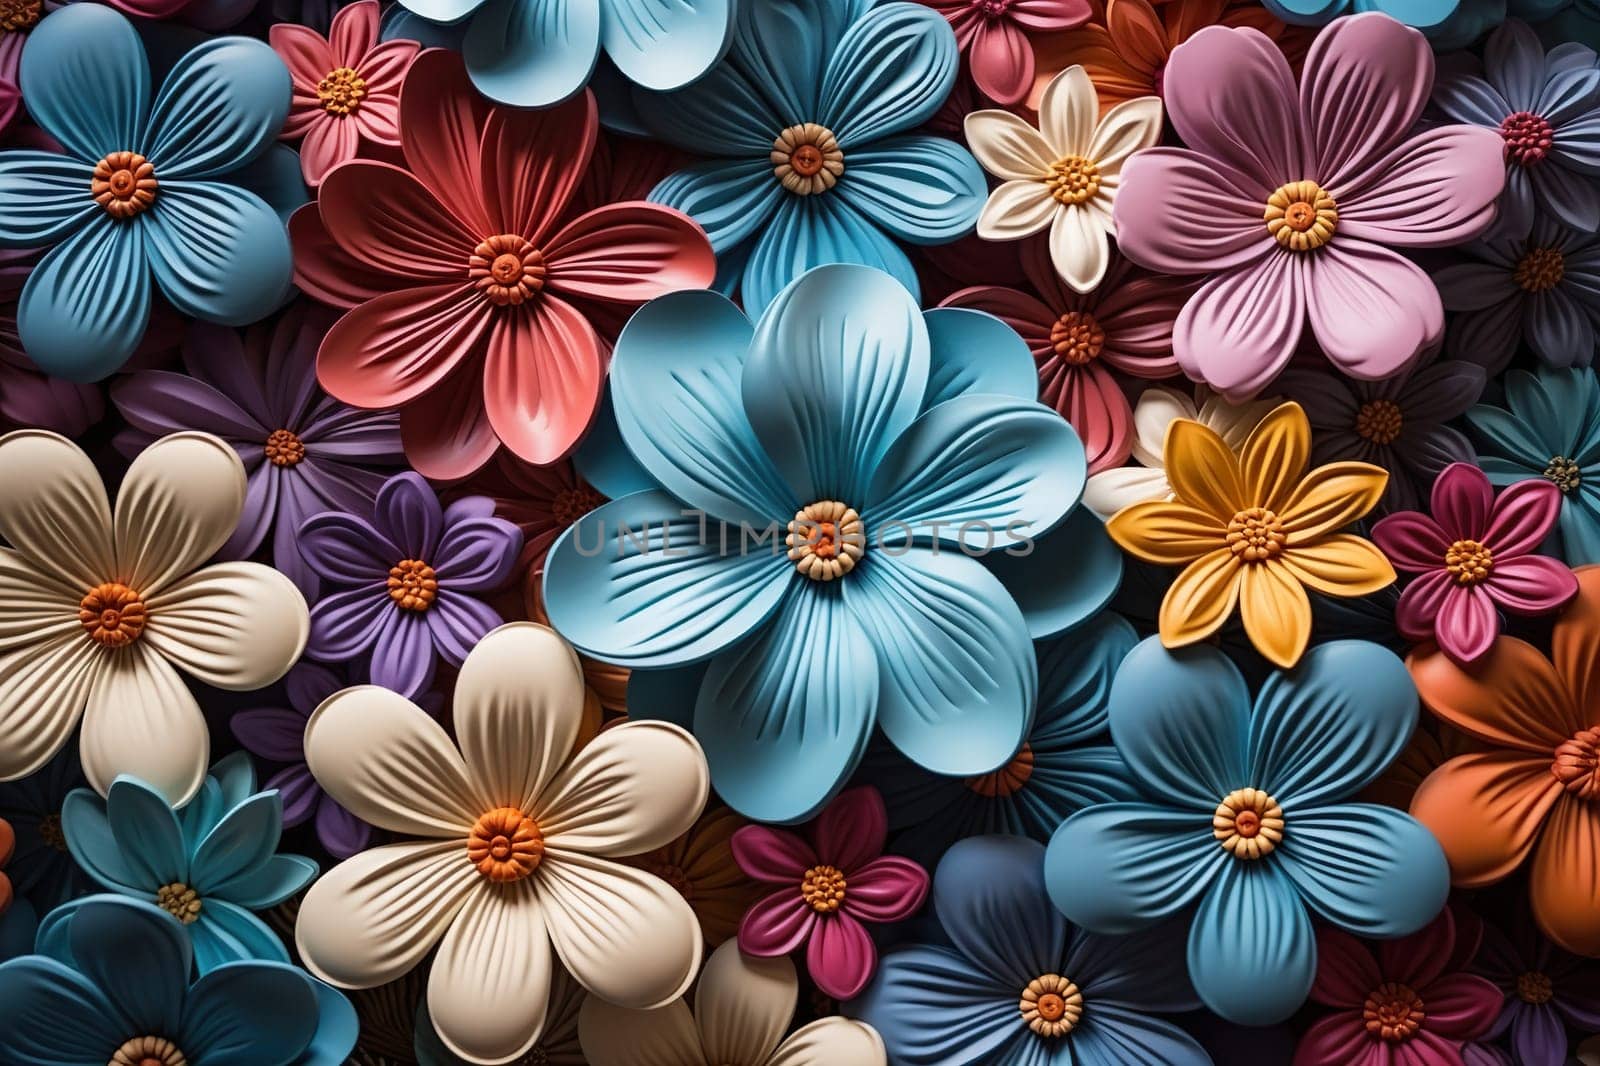 Background of multi-colored flowers cut out of paper.